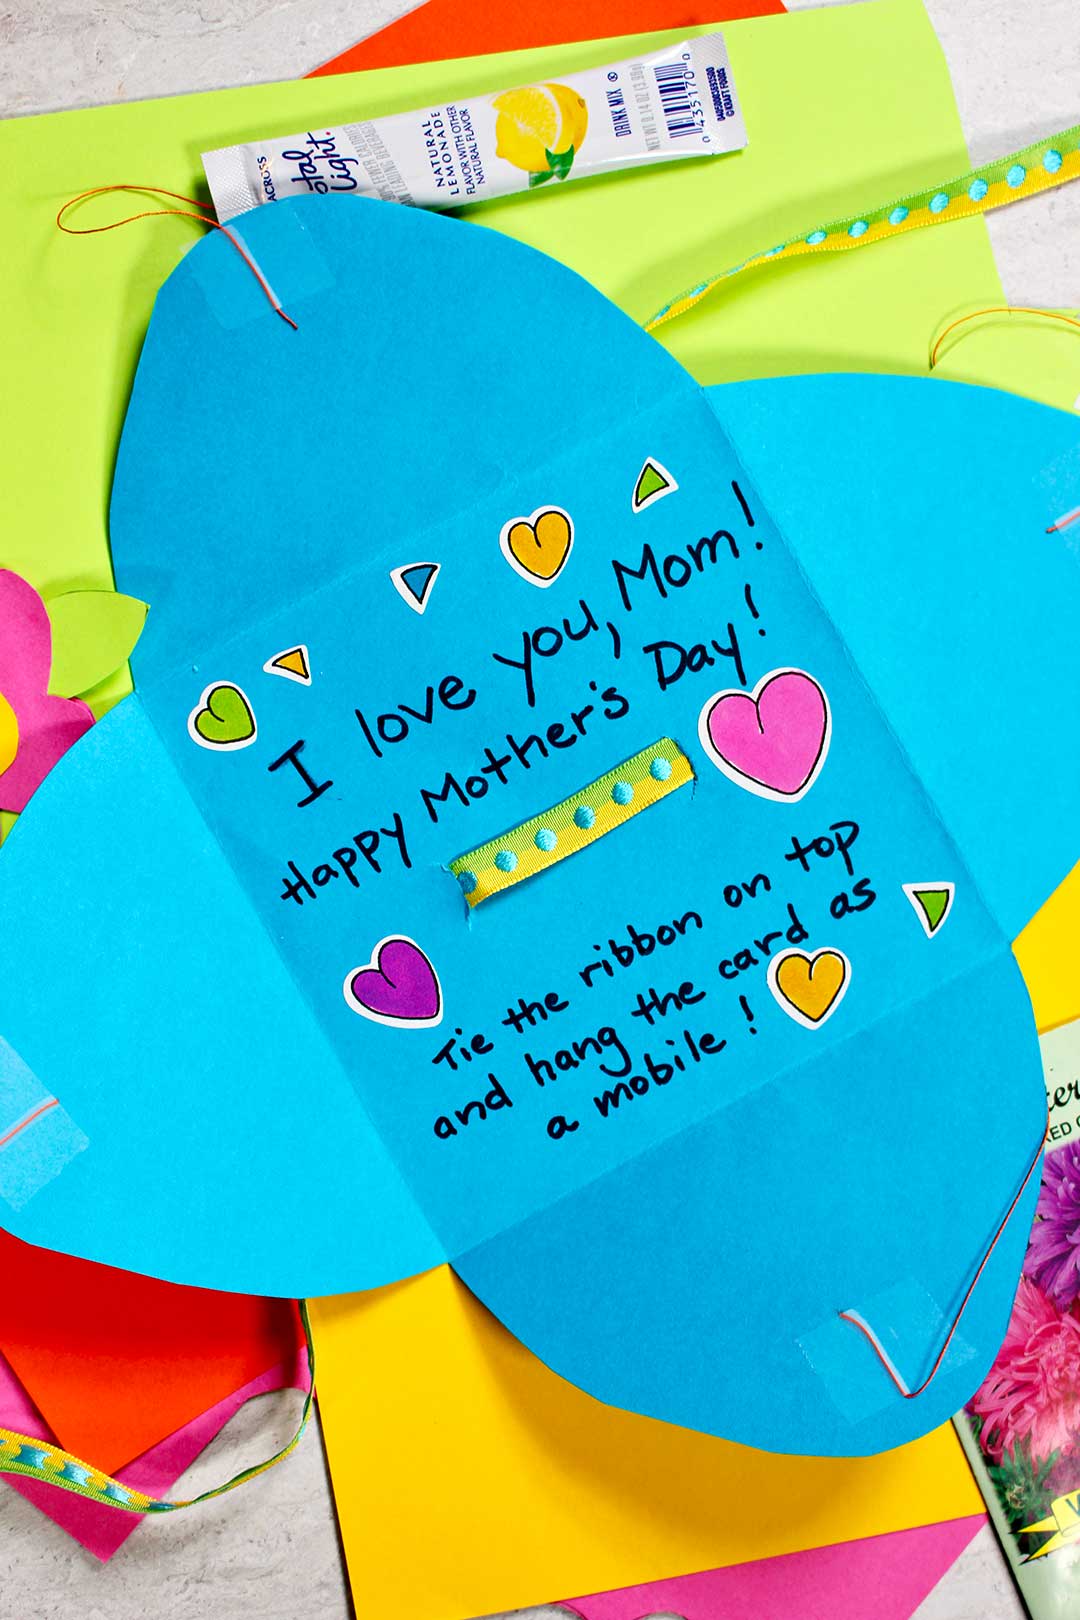 A blue homemade card addressed to Mom for Mother's Day with heart stickers on a pile of colorful paper.